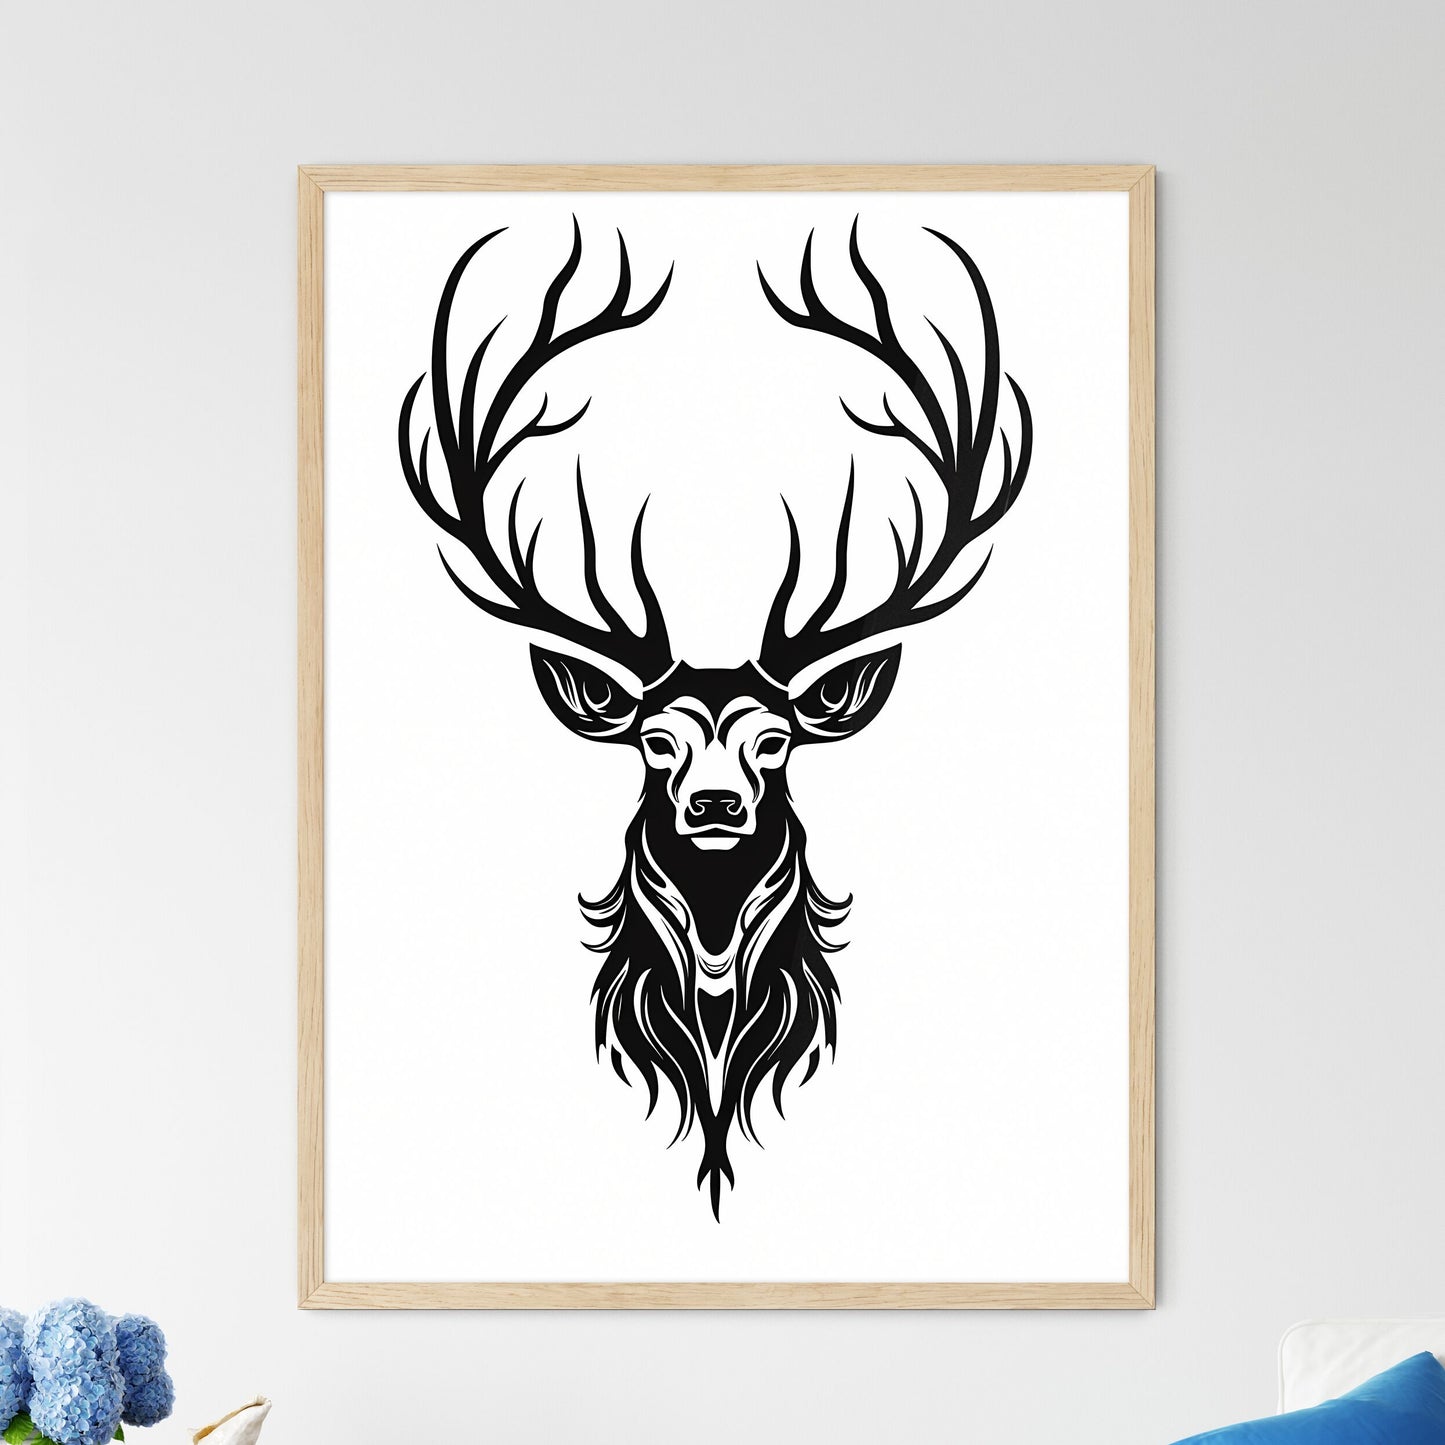 Black Silhouette Stag On White Background - A Black And White Image Of A Deer Head With Antlers Default Title